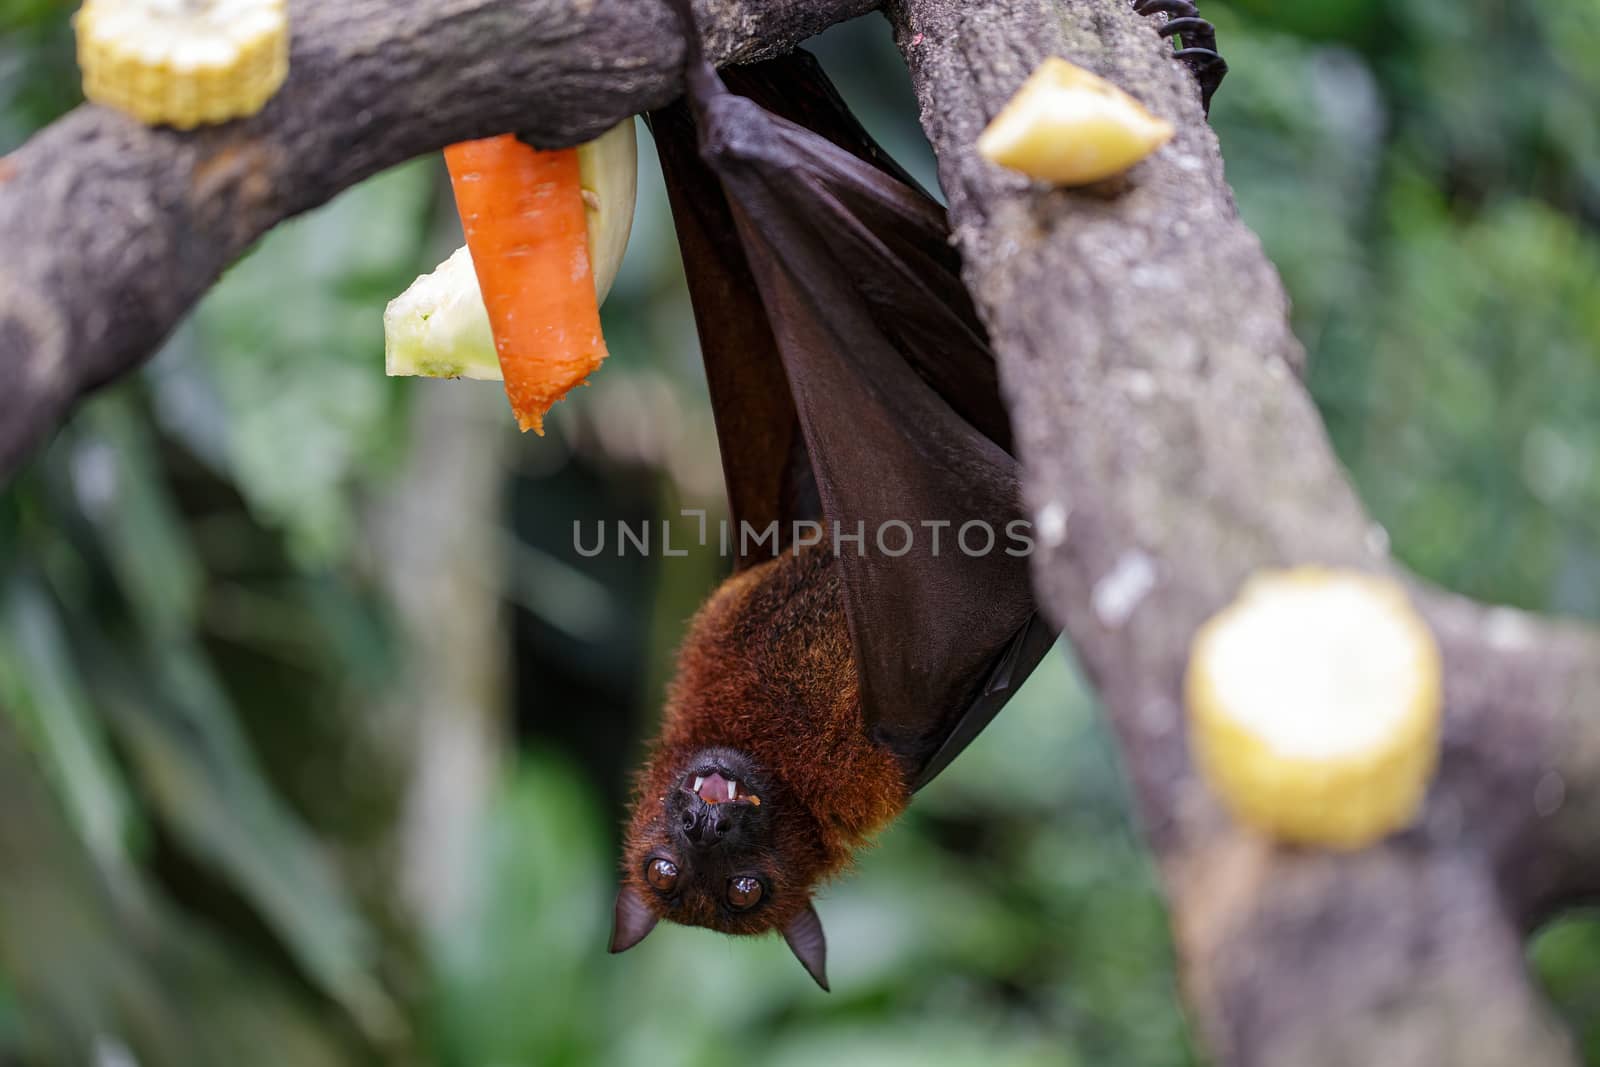 Big brown bat hanging on a tree eating fruits and vegetables. Concept of animal care, travel and wildlife observation. Concept of urban wild animals.